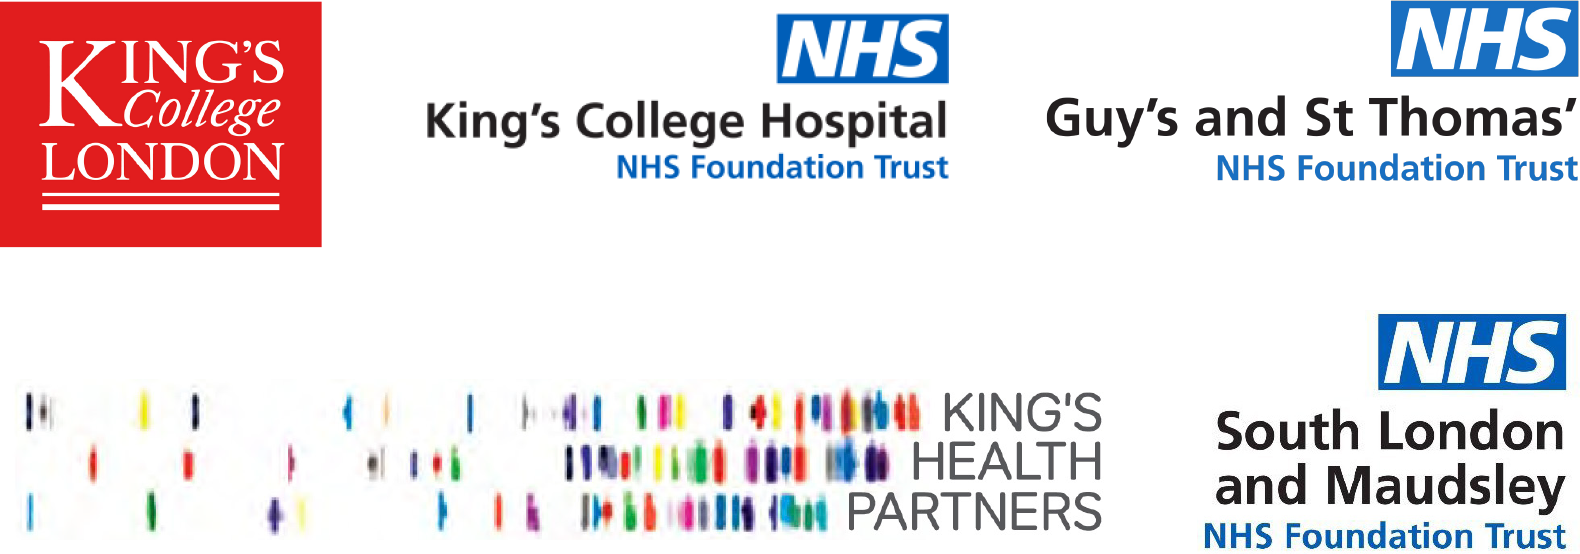 King’s College London, King’s College Hospital NHS Foundation Trust, Guy’s and St Thomas’ NHS Foundation Trust, King’s Health Partners, South London and Maudsley NHS Foundation Trust